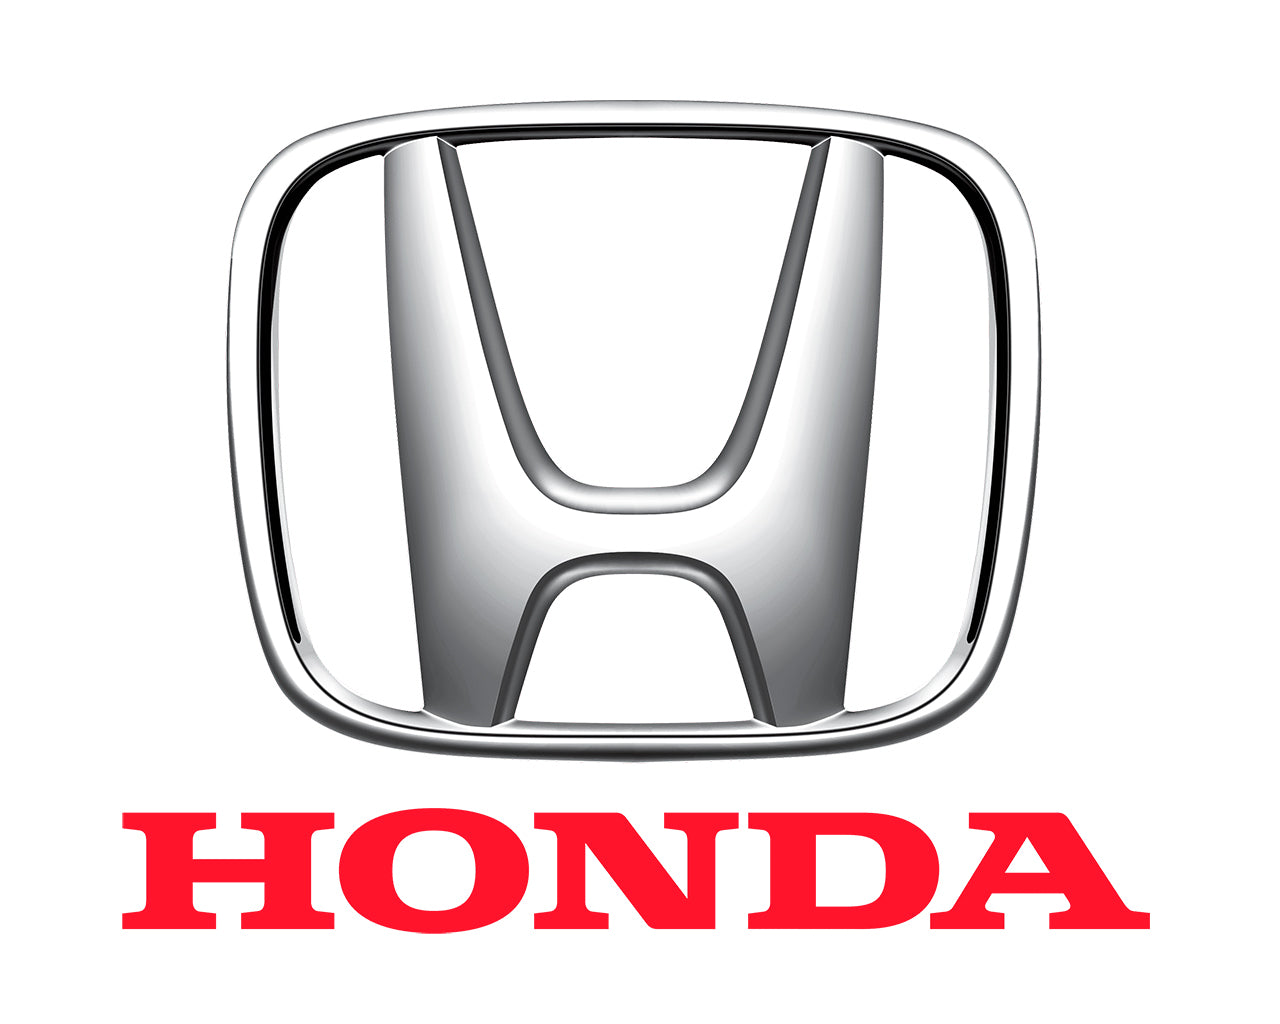 Honda symbol of a chrome H in a square above the word Honda in red